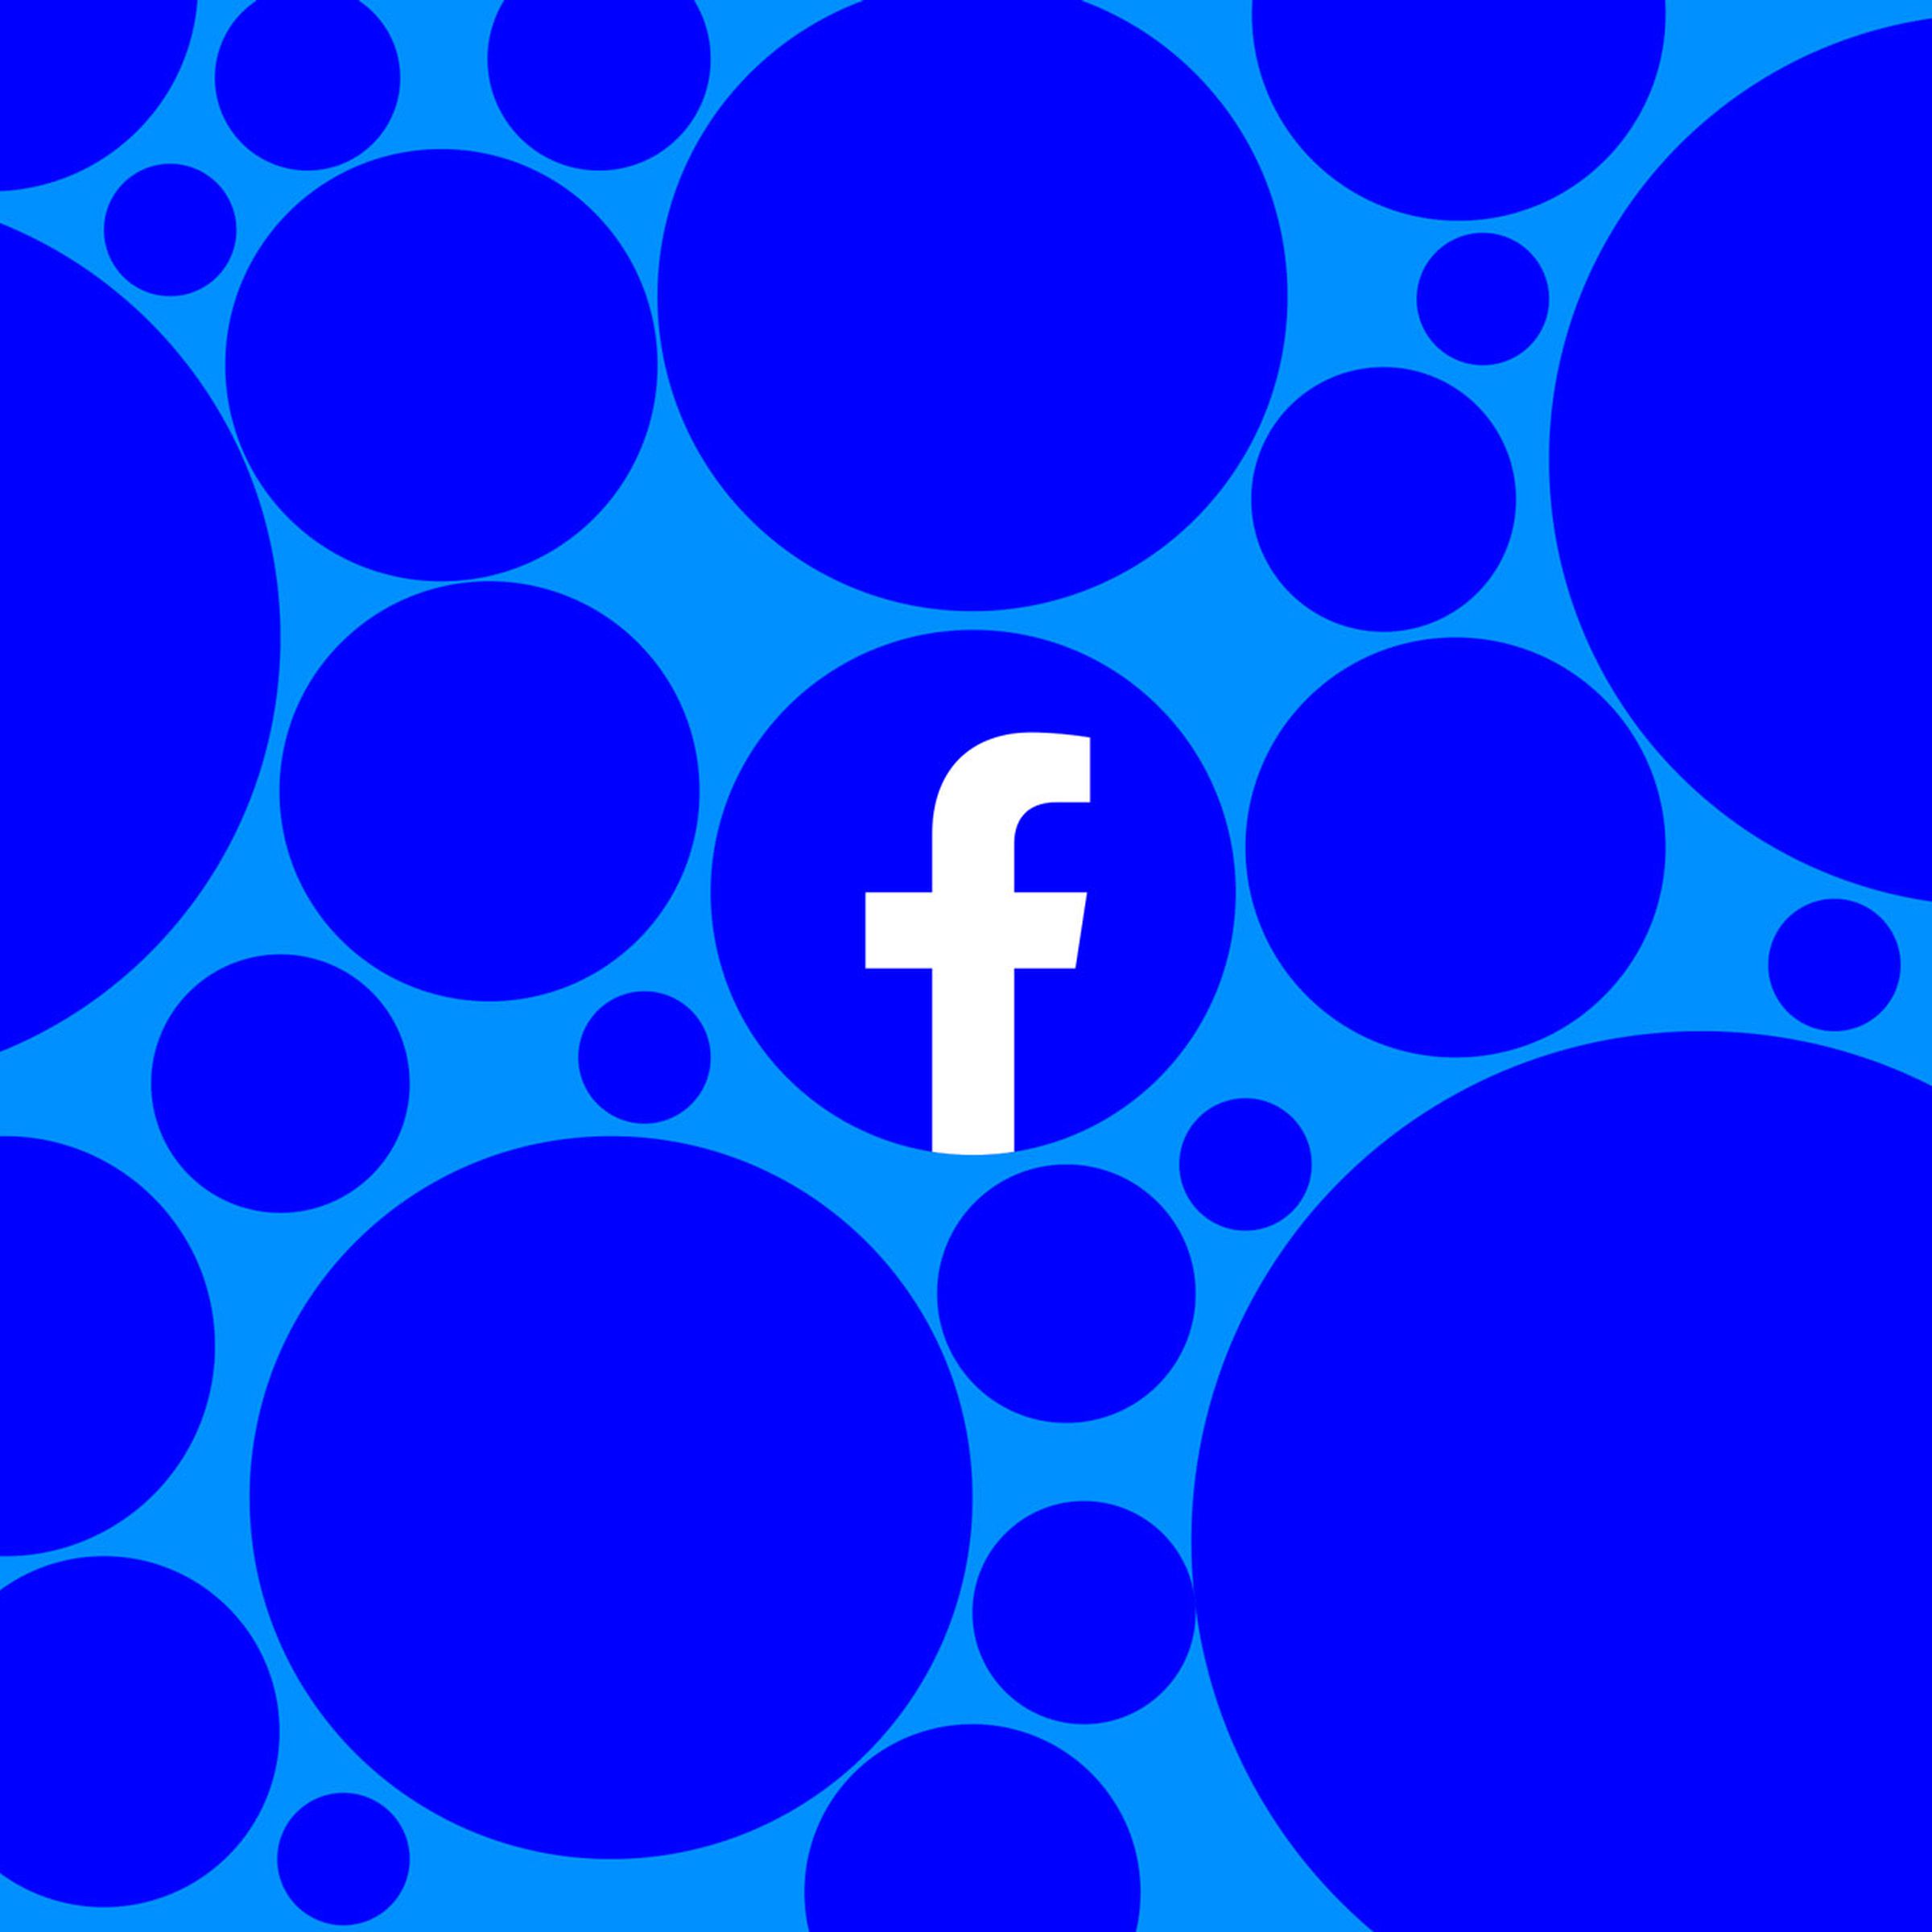 The Facebook logo on a blue background, surrounded by dark blue circles of various sizes